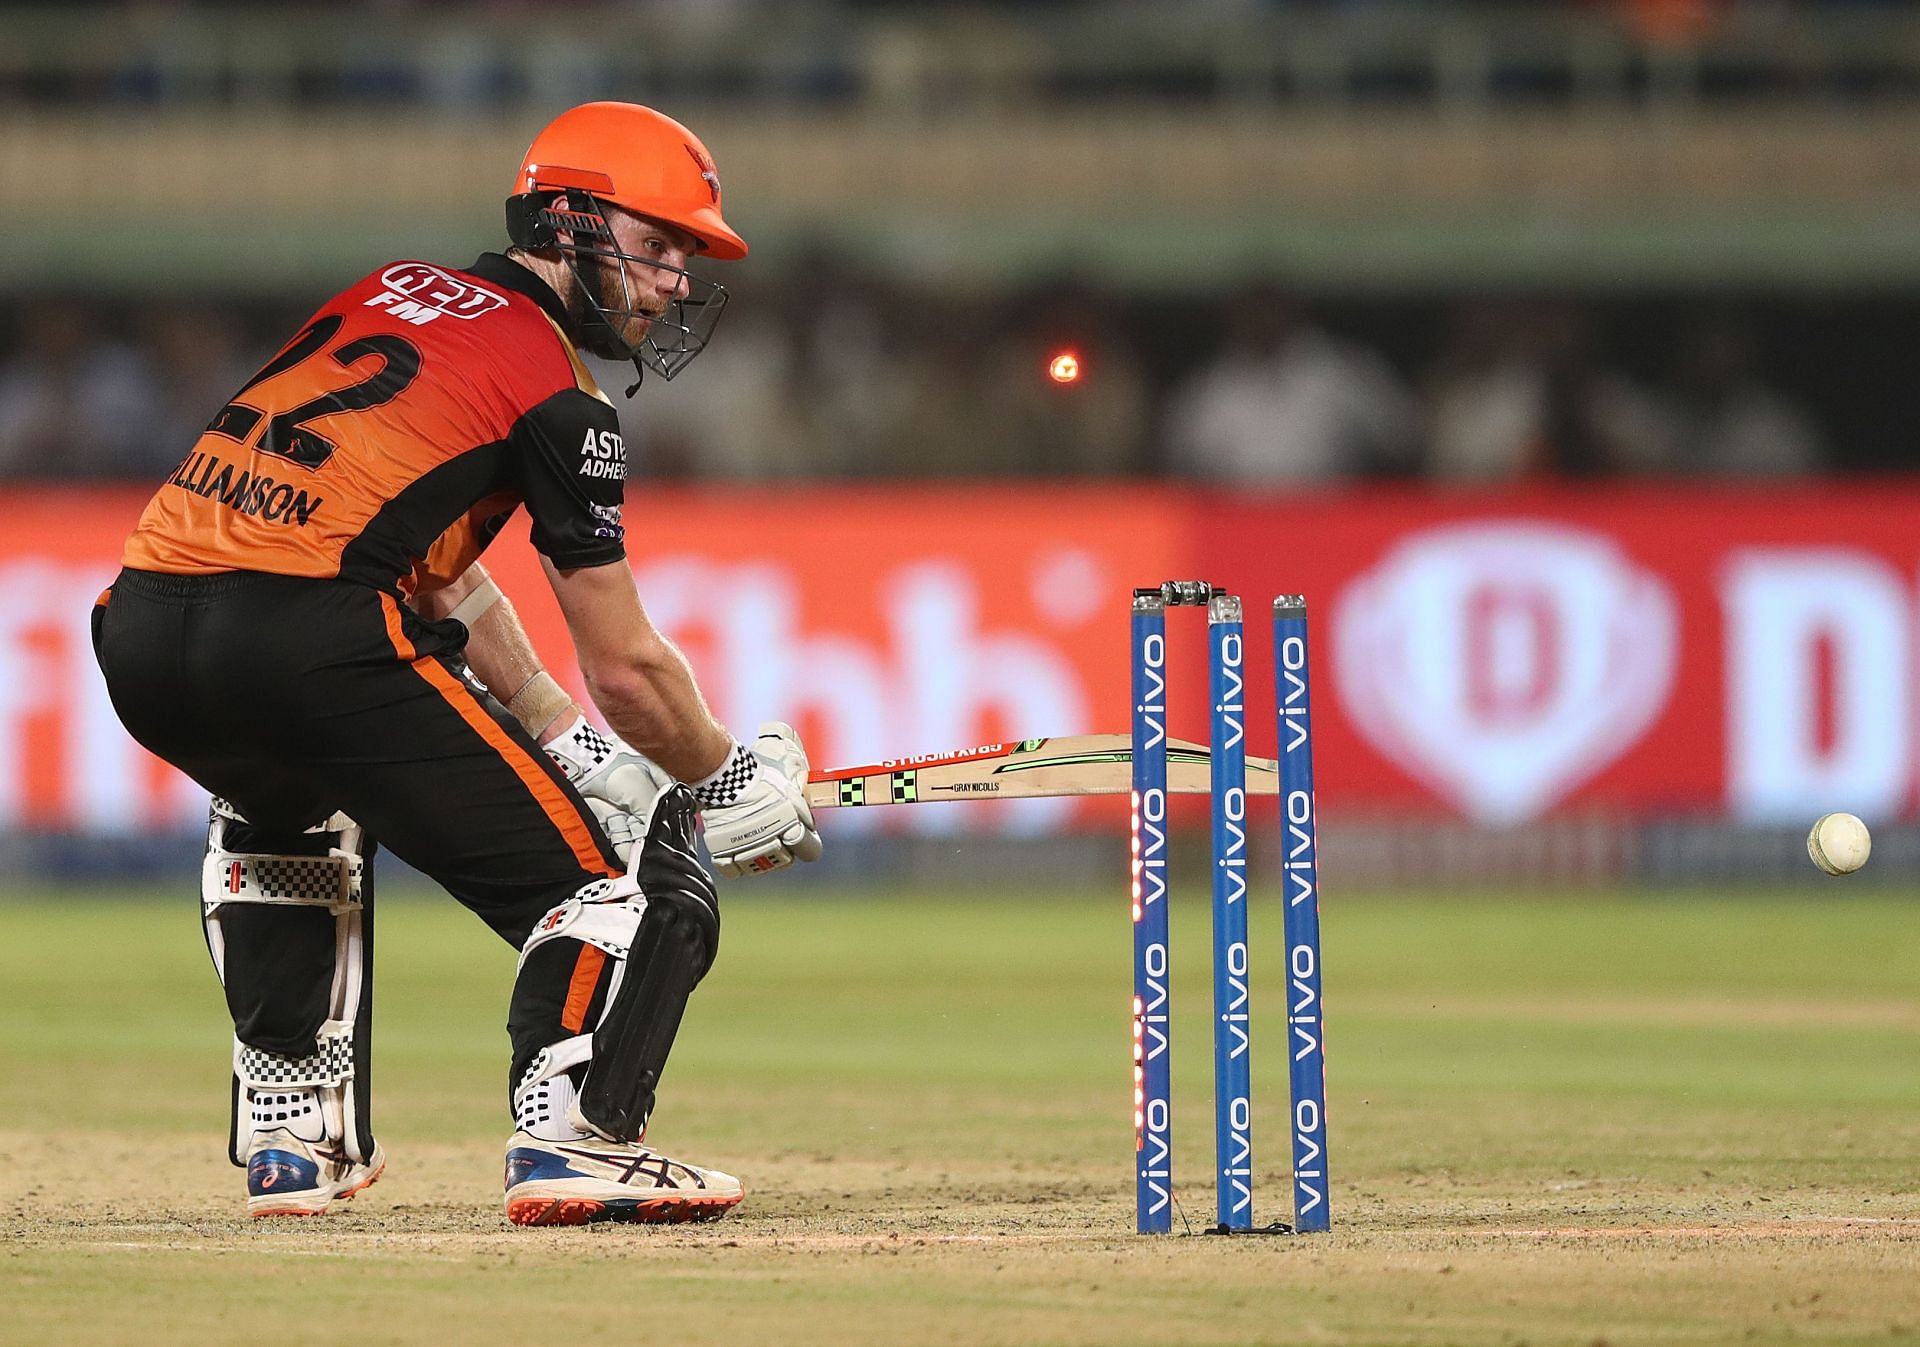 Sunrisers Hyderabad finished last in the previous IPL season